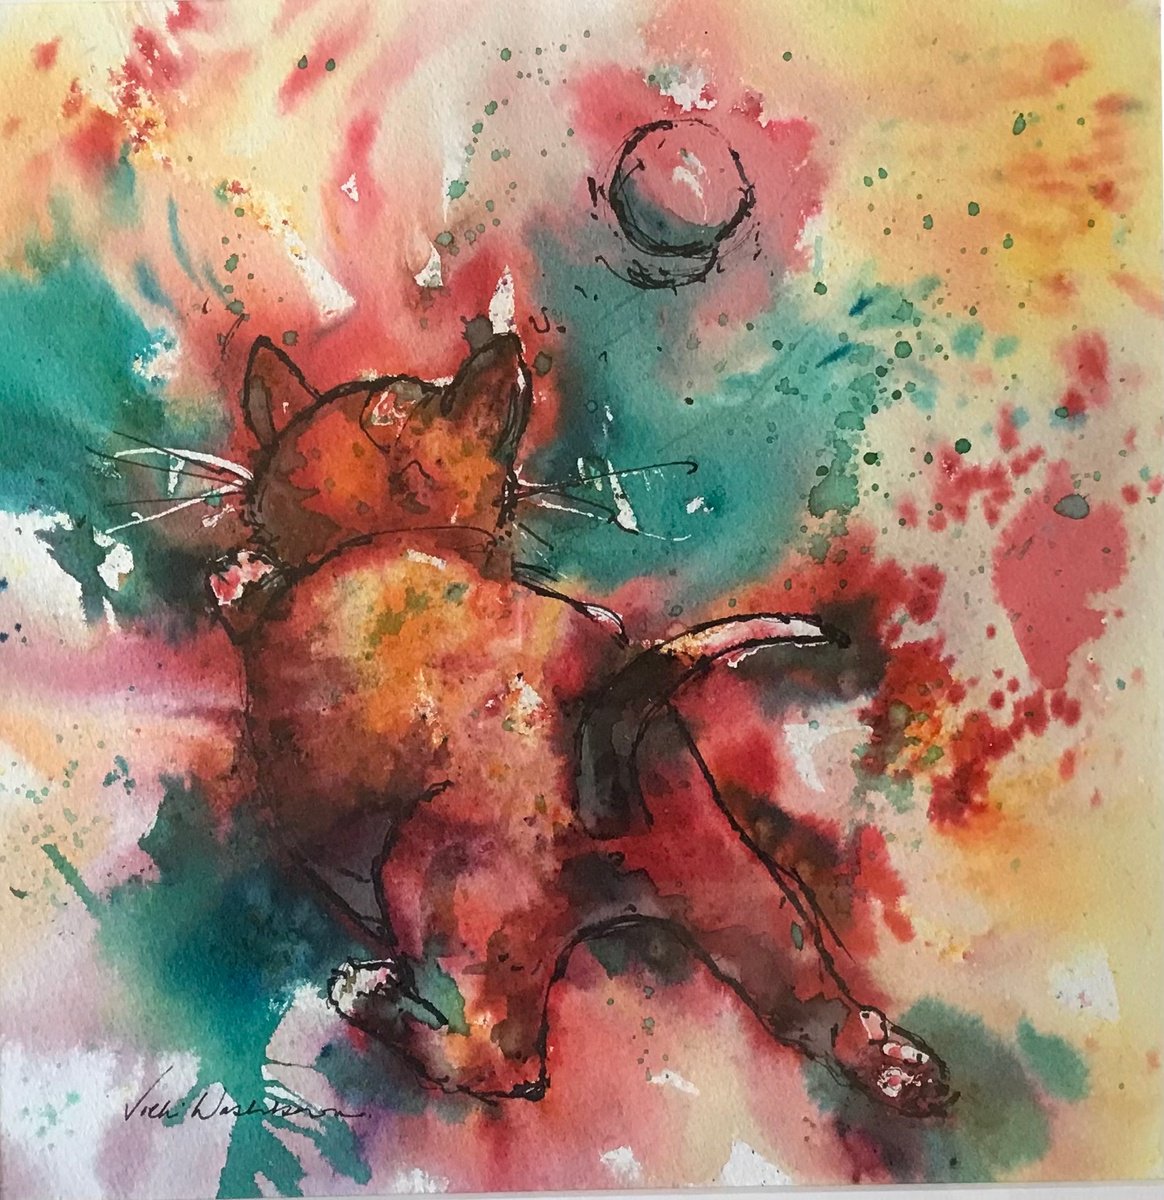 Kitten chasing a bubble by Vicki Washbourne